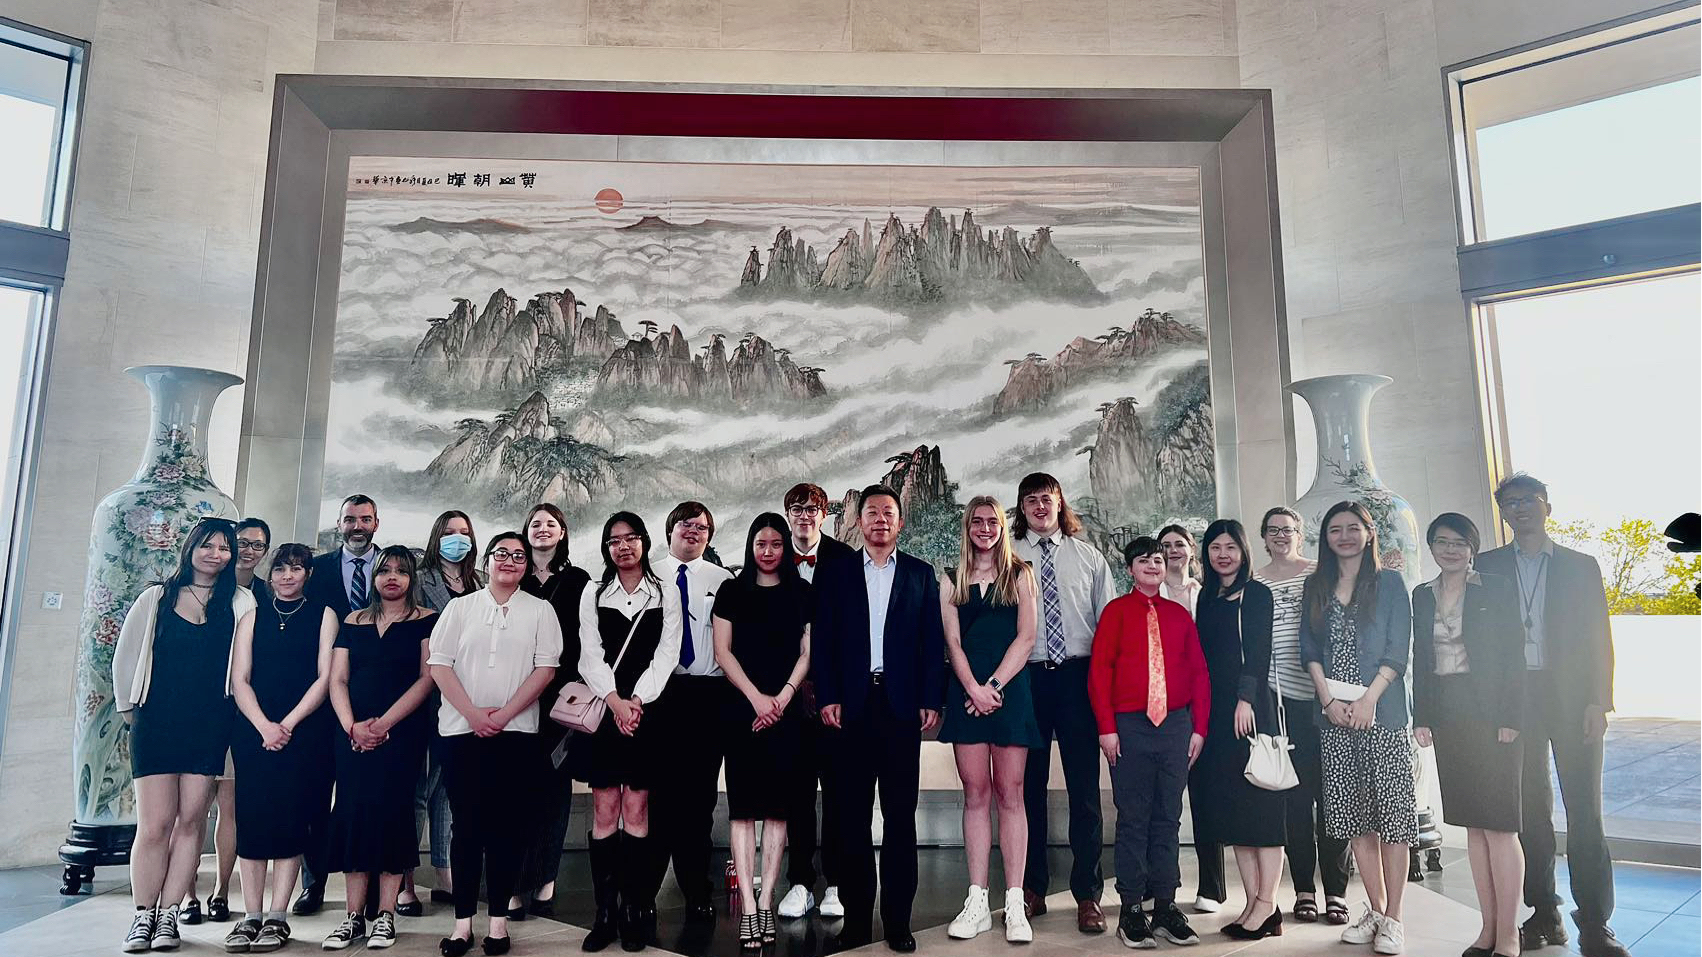 American high school students who study Chinese in Muscatine, Iowa visited the Embassy of the People’s Republic of China in the U.S. in Washington D.C.